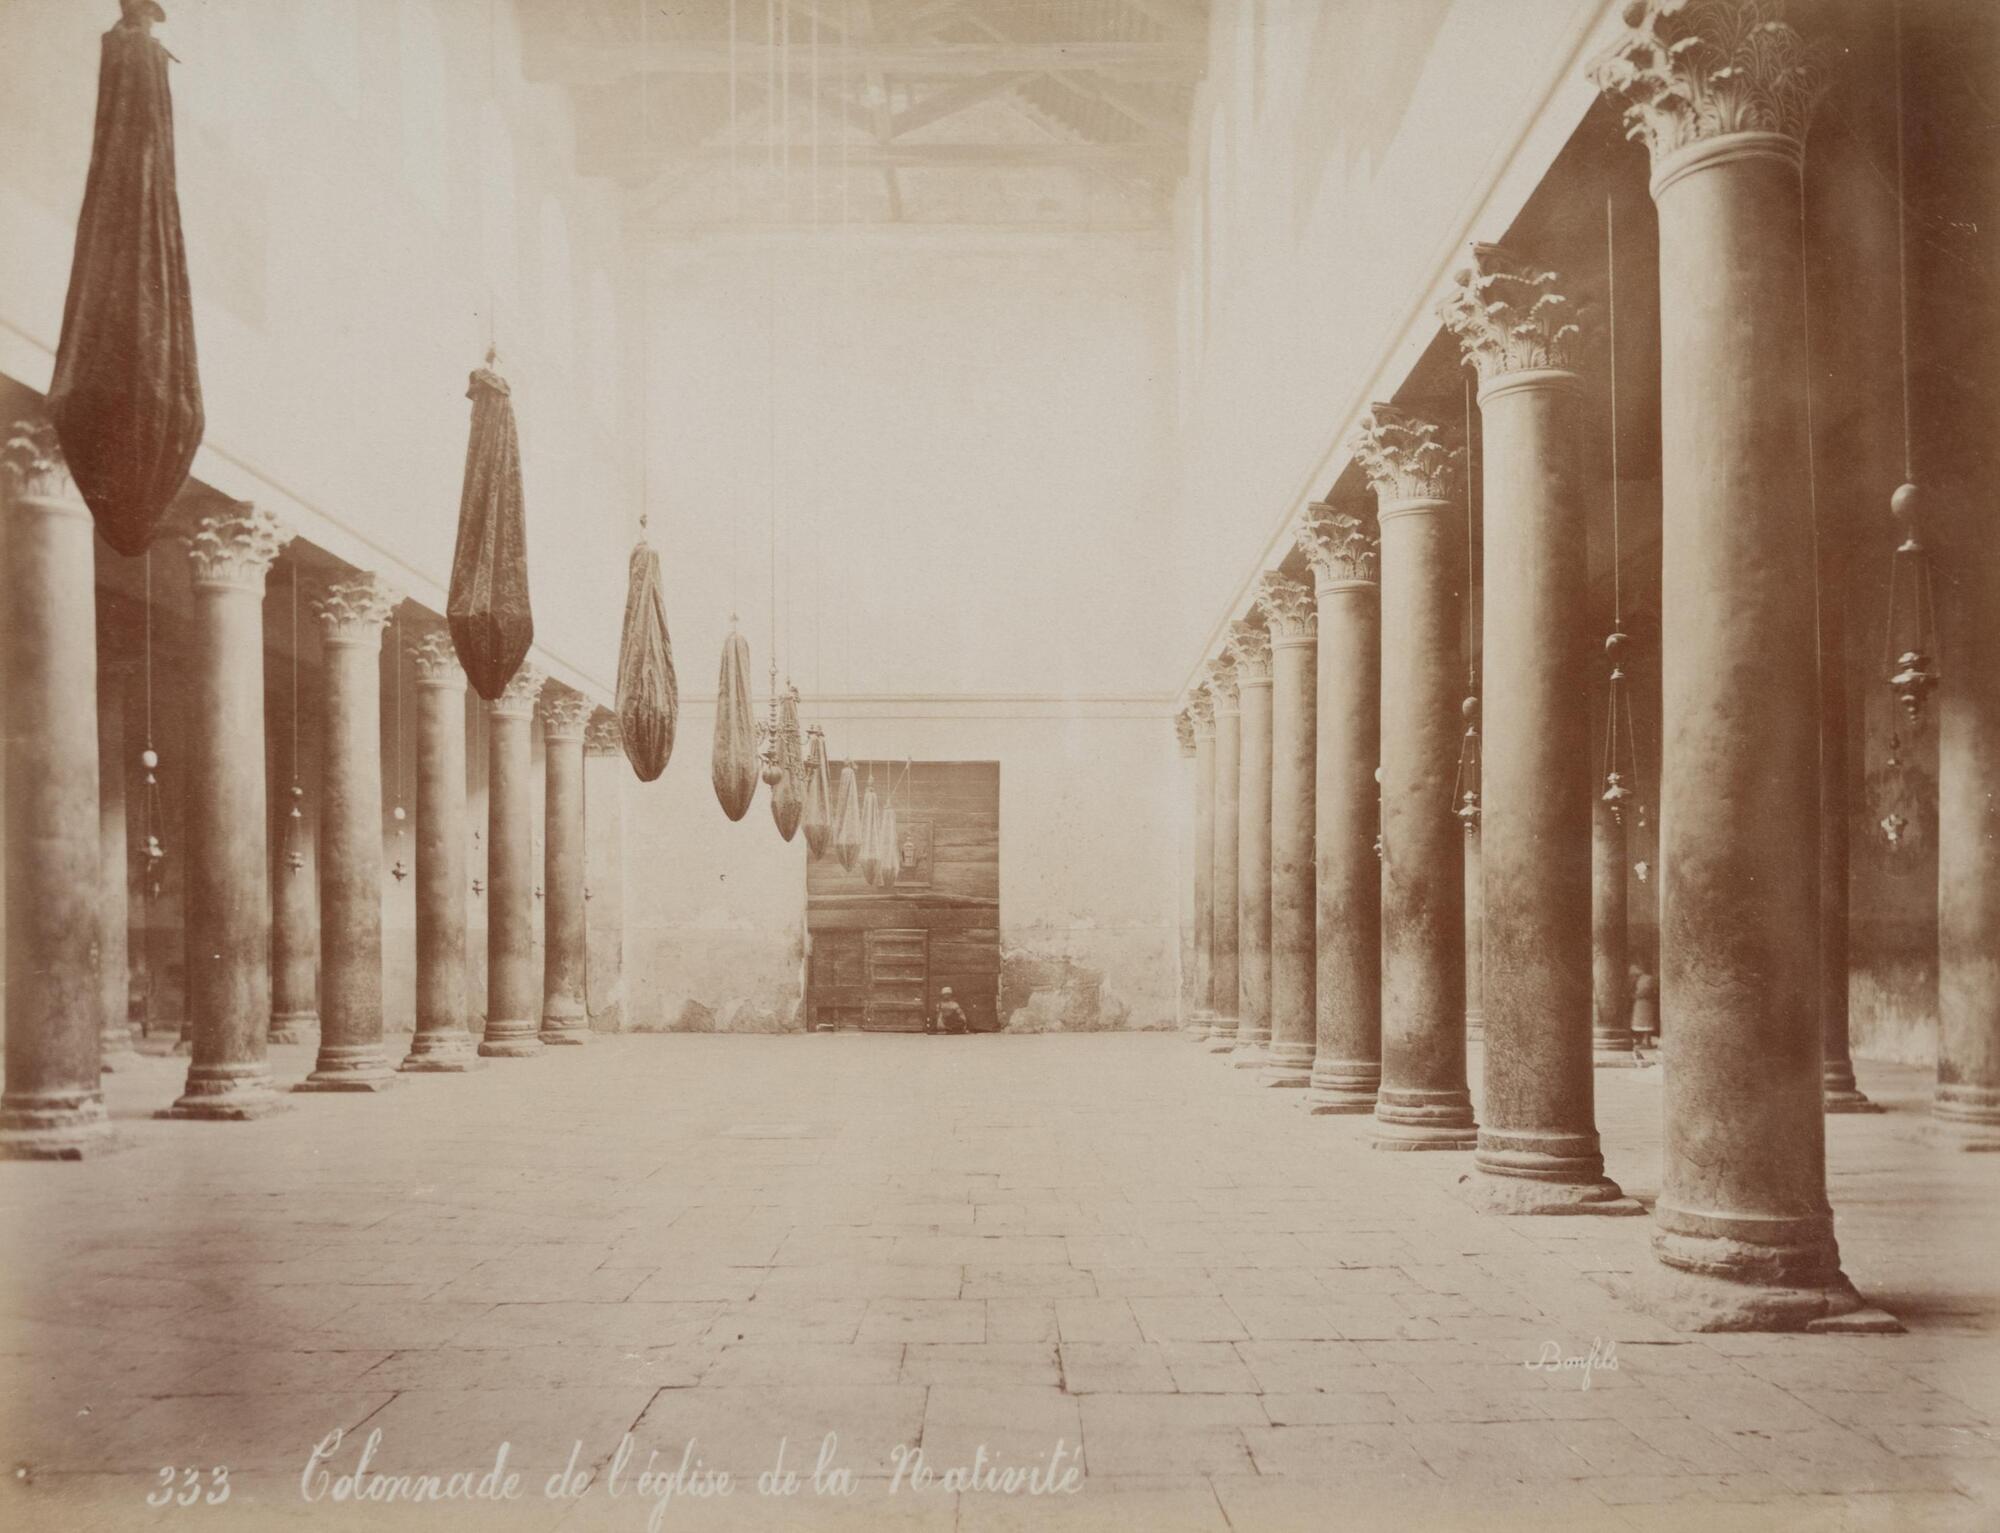 Interior view of a mostly deserted basilica, lined on both sides by rows of columns. A figure sits on the ground with his back against a wall made of wooden slats. 